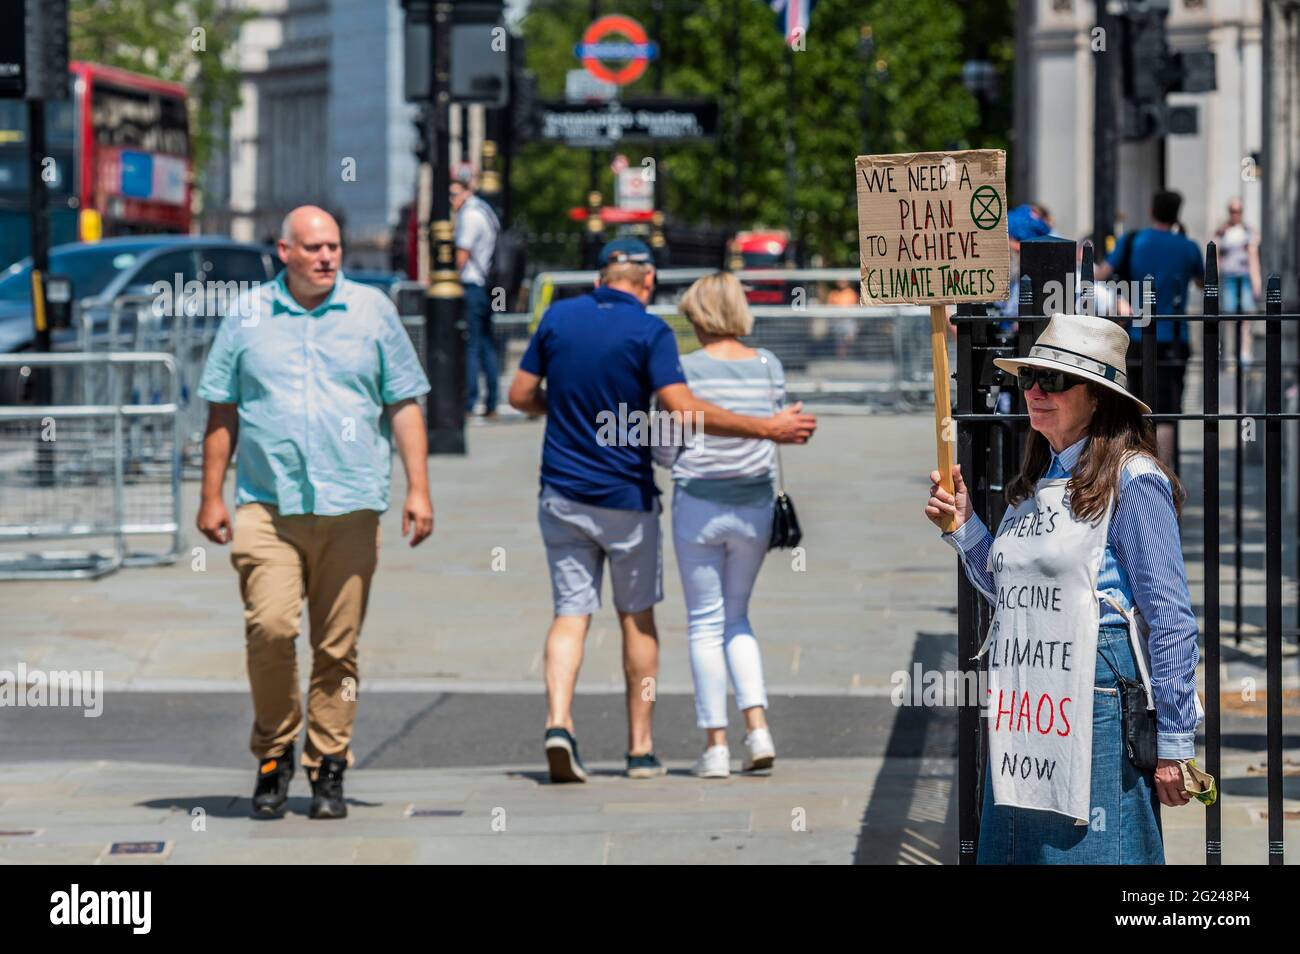 London, UK. 8th June, 2021. We need a plan - A solitary Extinction Rebellion climate protester outside Parliament. As a man rants into his phone about government crooks. Credit: Guy Bell/Alamy Live News Stock Photo